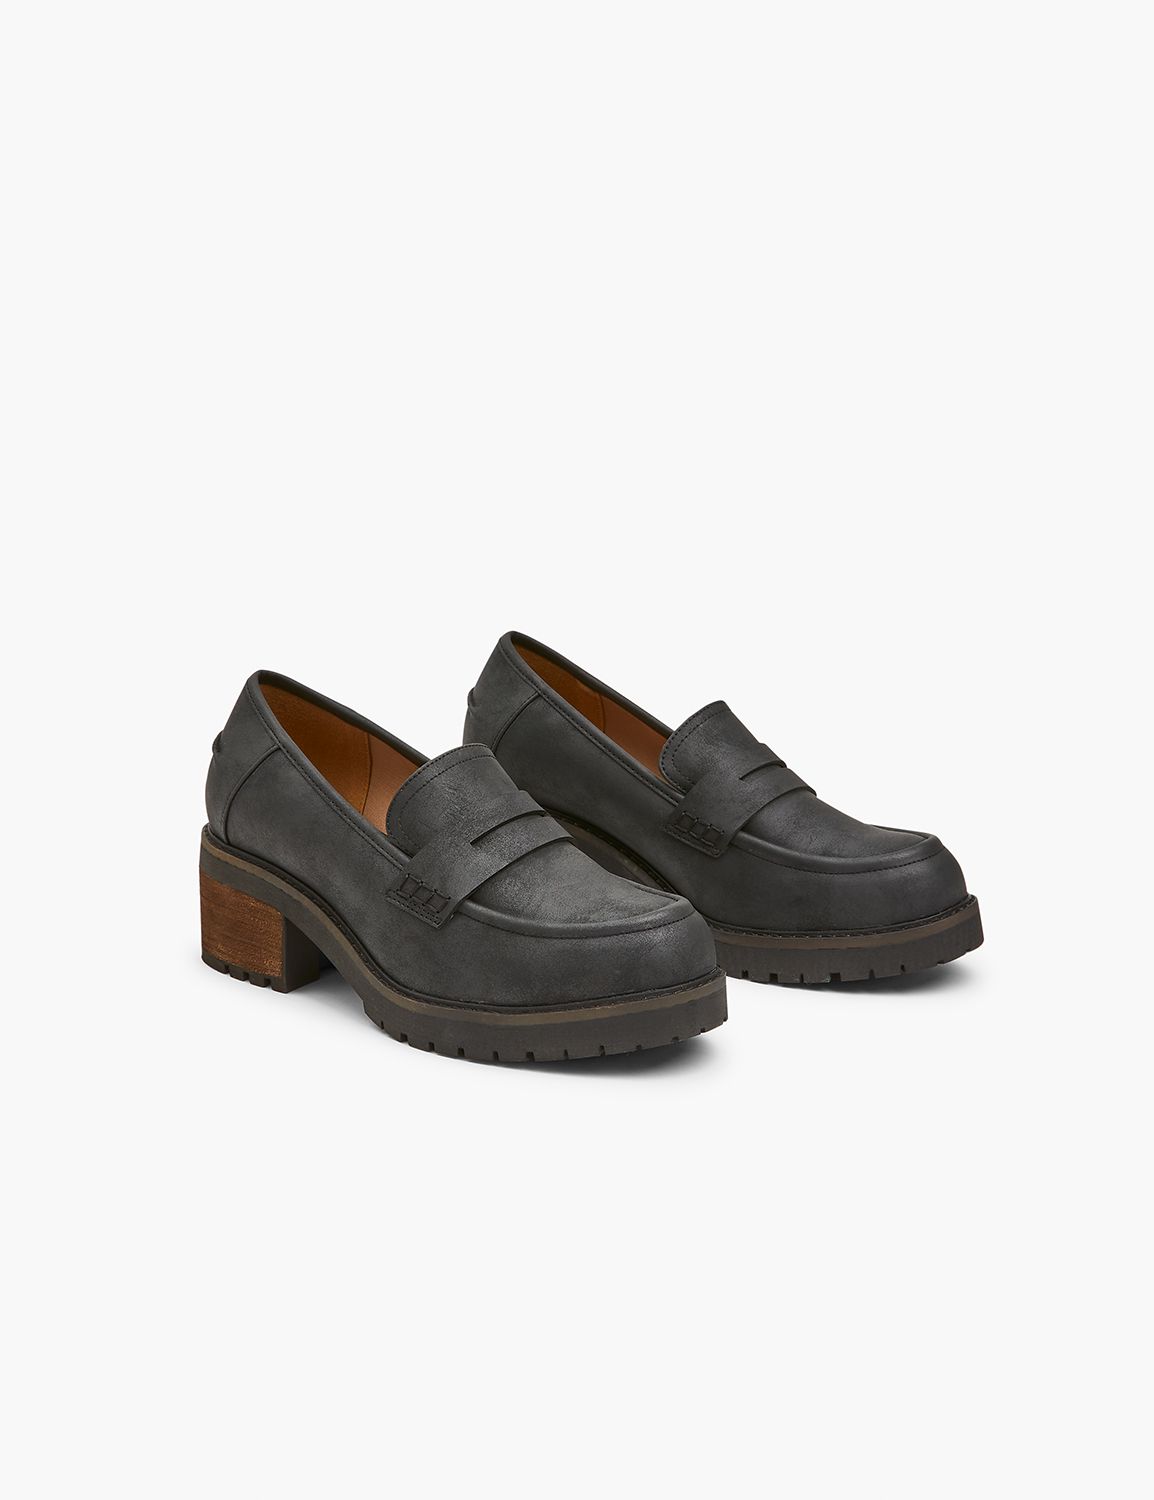 These Shopper-Loved Dr. Scholl's Loafers Are 55% Percent Off at